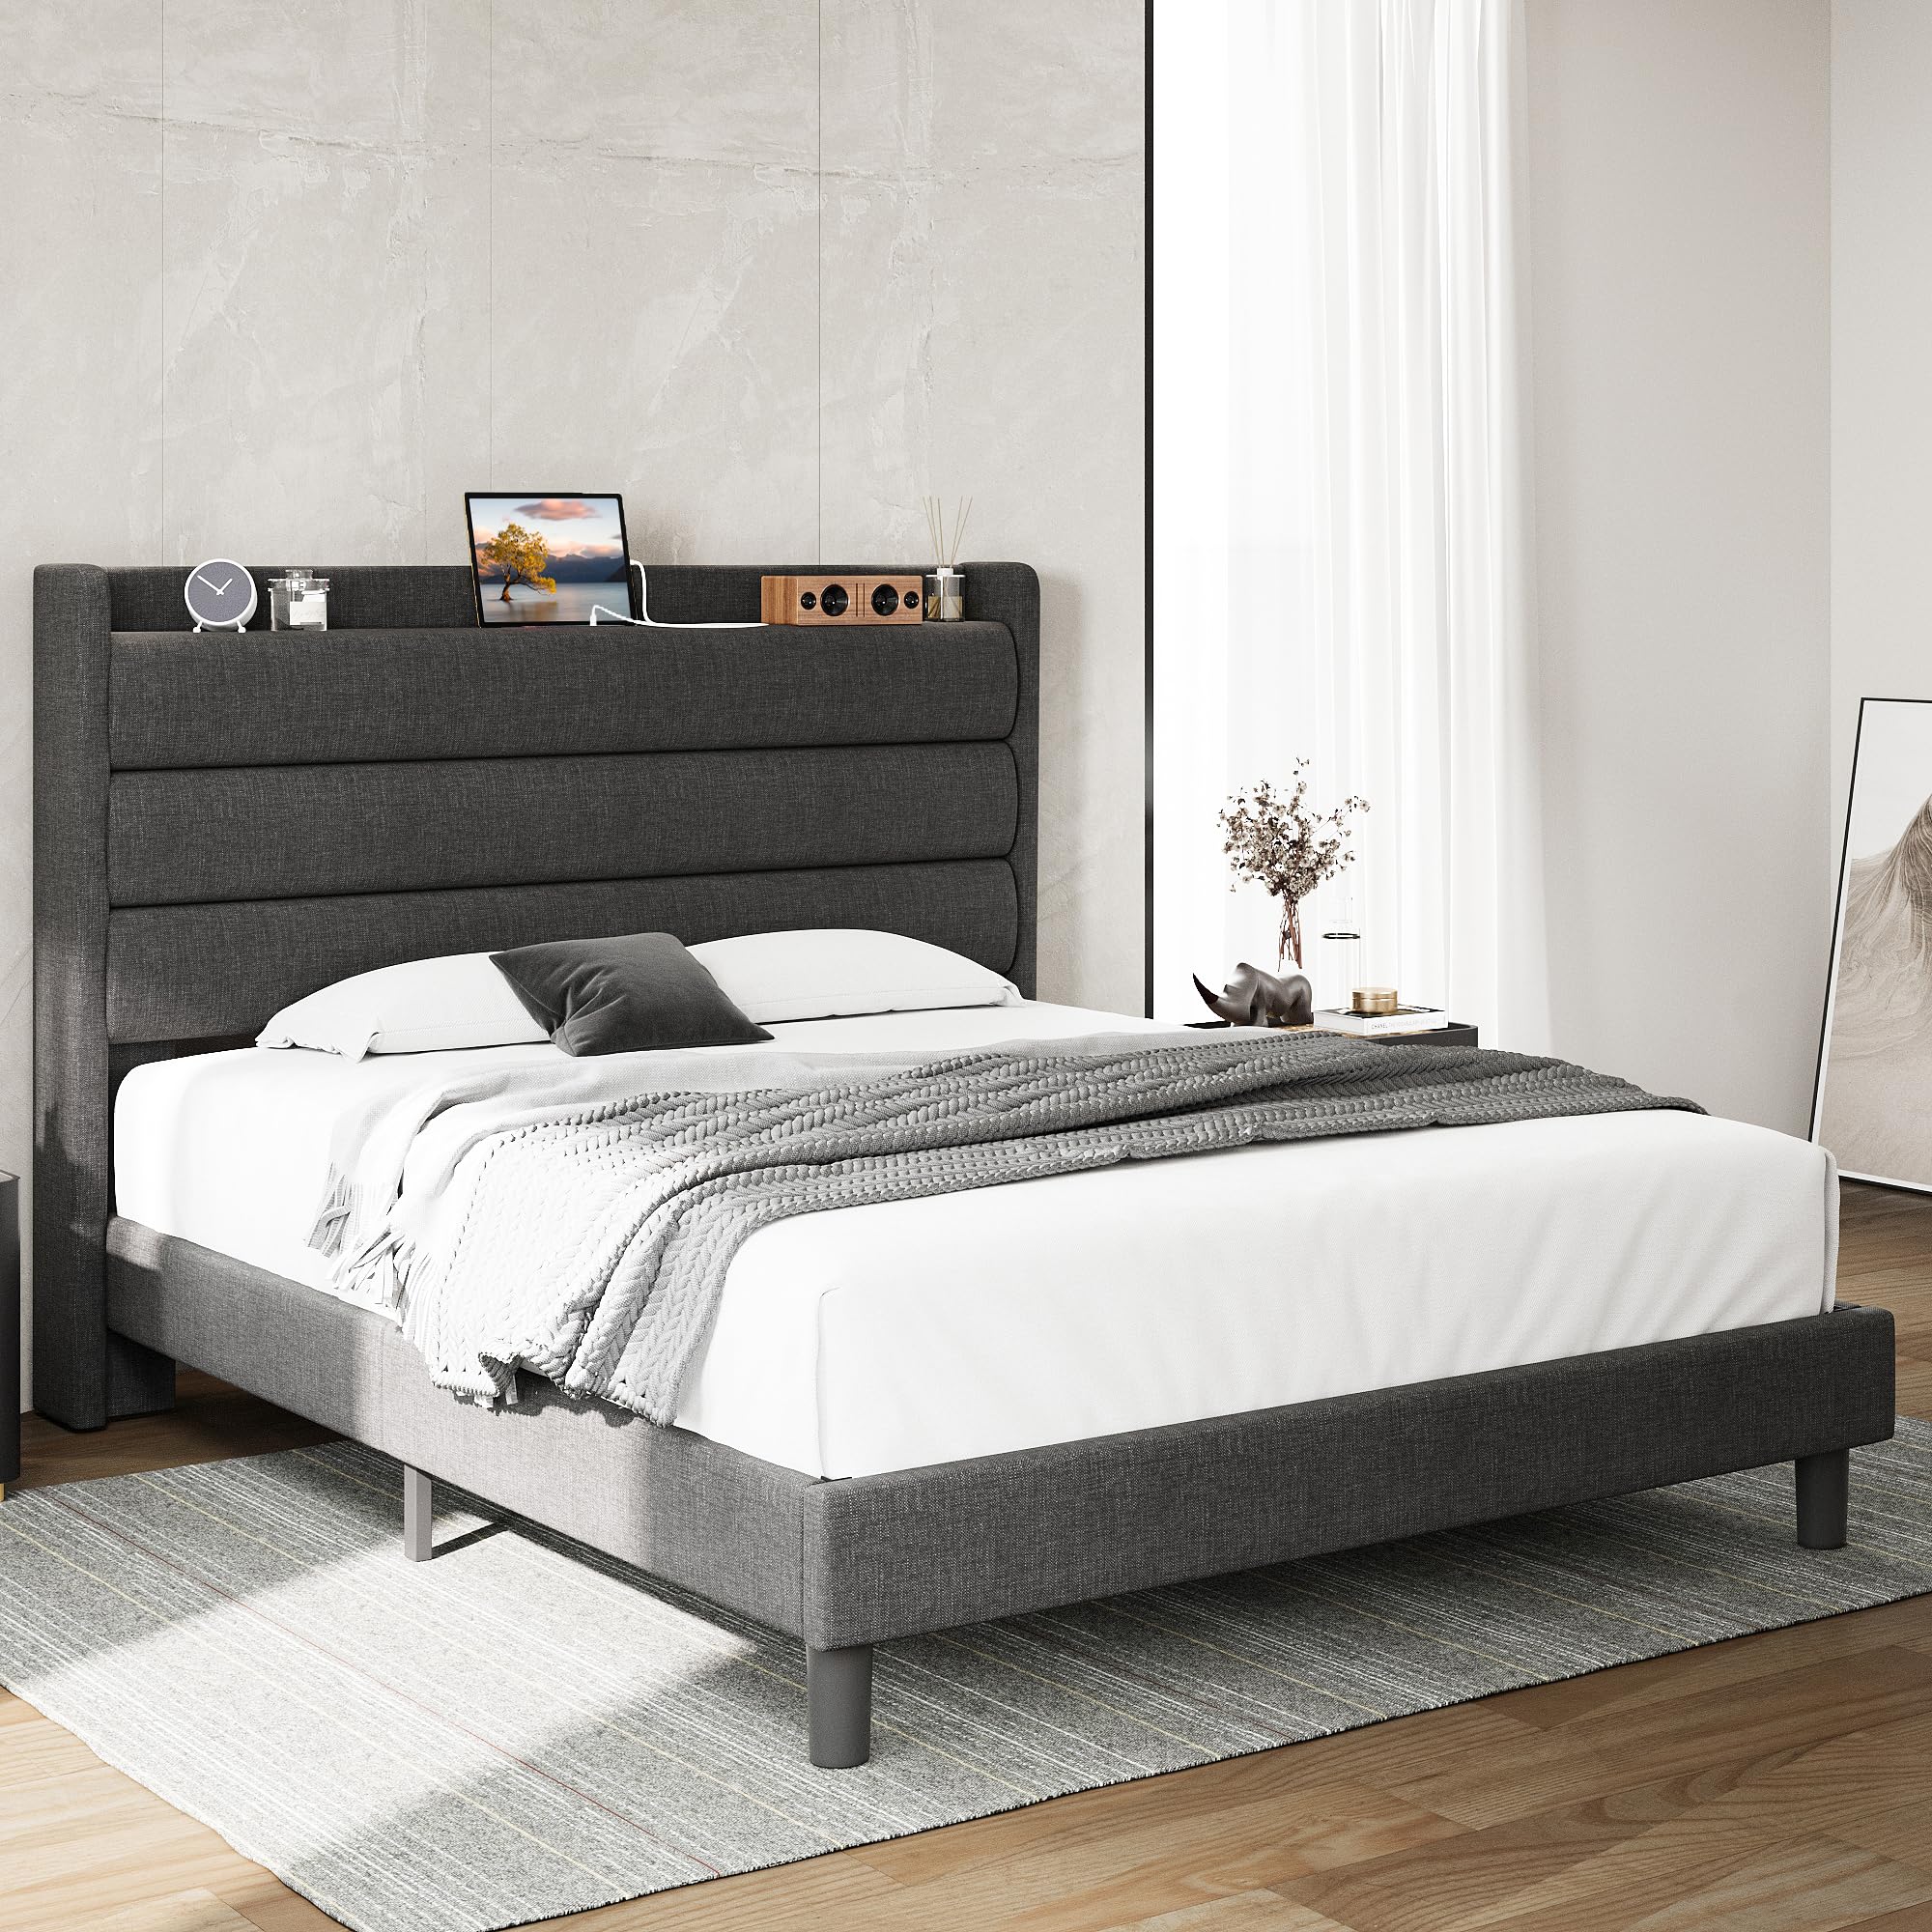 LIKIMIO Queen Size Bed Frame, Storage Headboard with Outlets, Sturdy and Stable, No Noise, No Box Springs Needed, Dark Gray